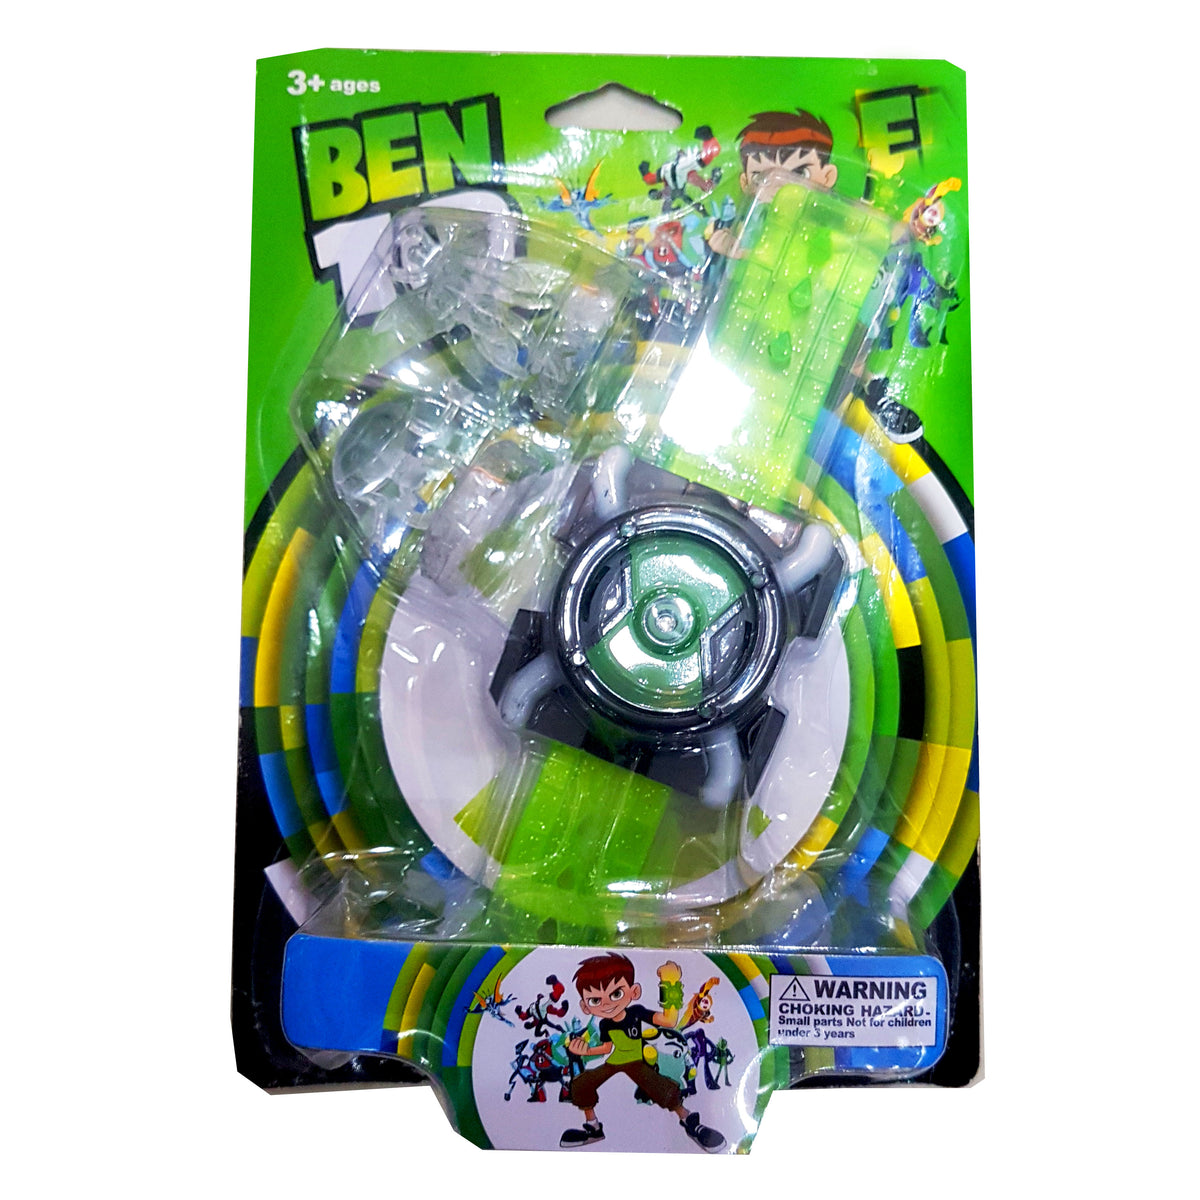 Ben 10 Ultimate Alien Watch with 2 Exclusive Action Figures - Perfect Gift for Boys Aged 3+